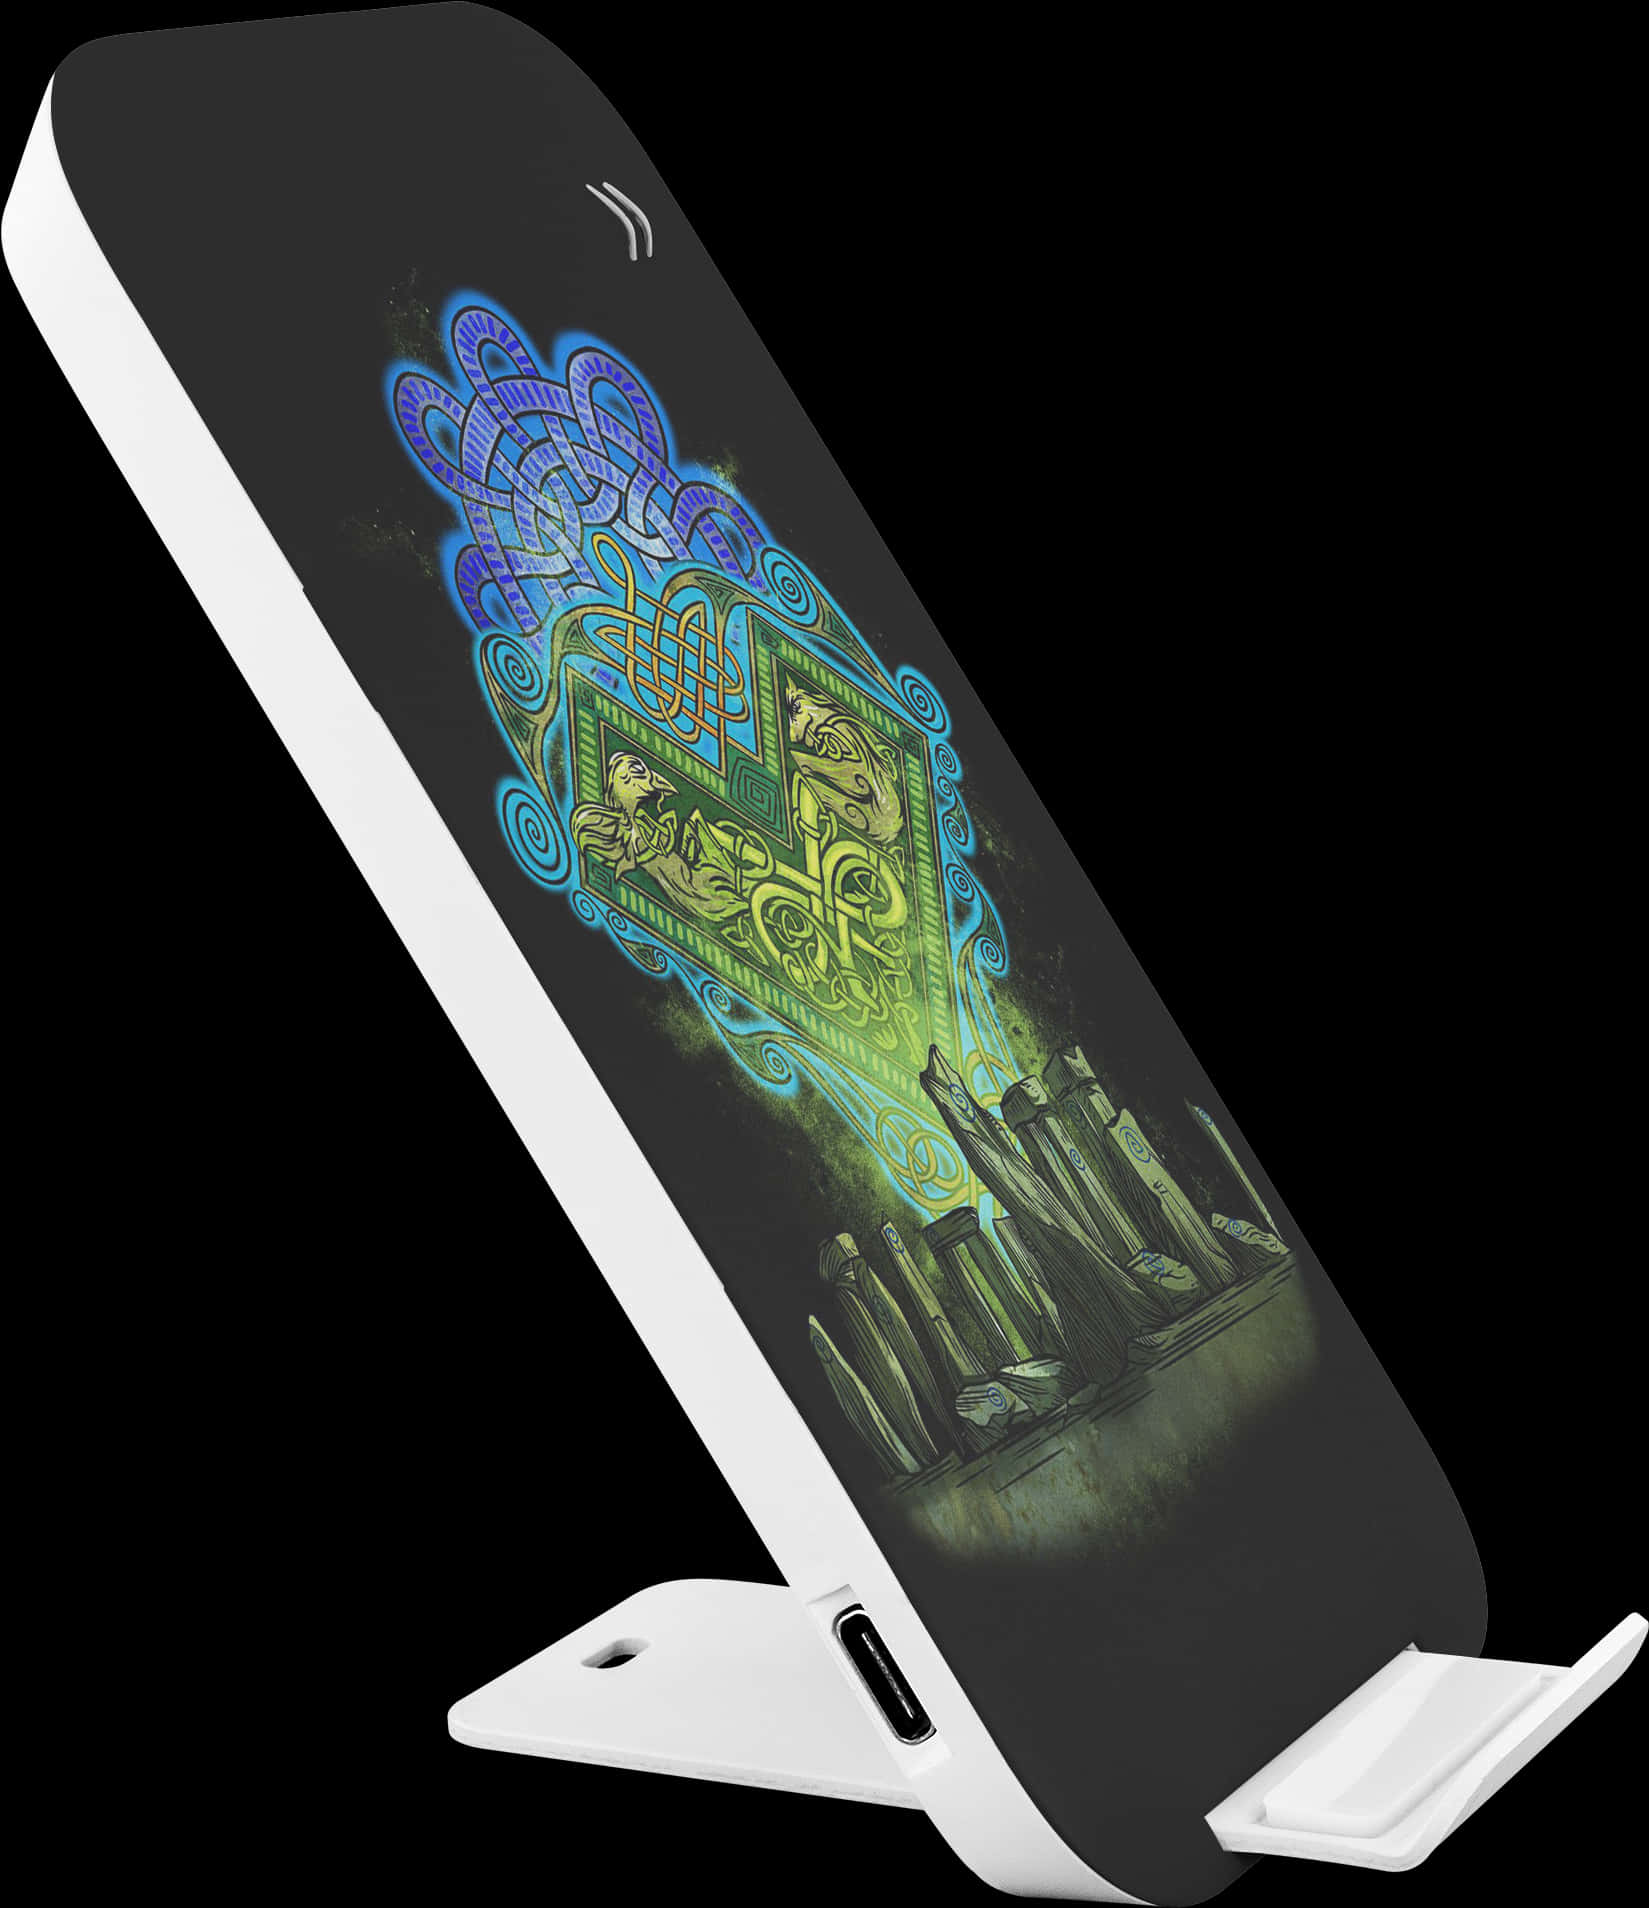 Stonehenge Wireless Phone Charger'class= - Smartphone, Hd Png Download